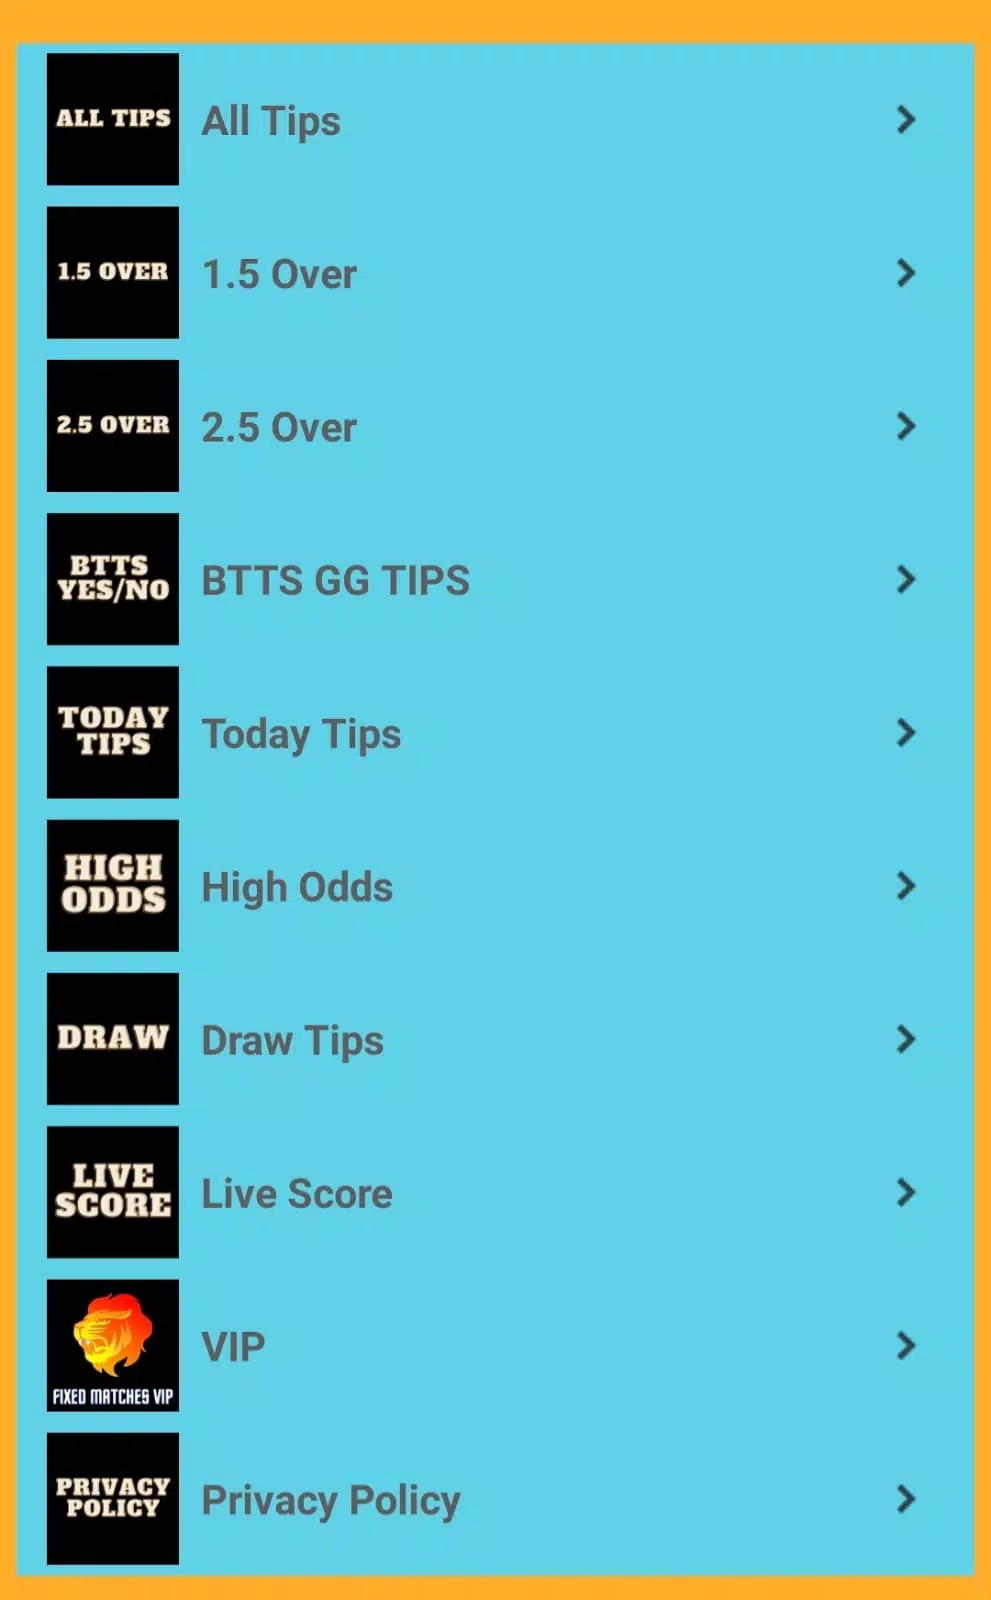 Fixed Matches Vip APK for Android Download